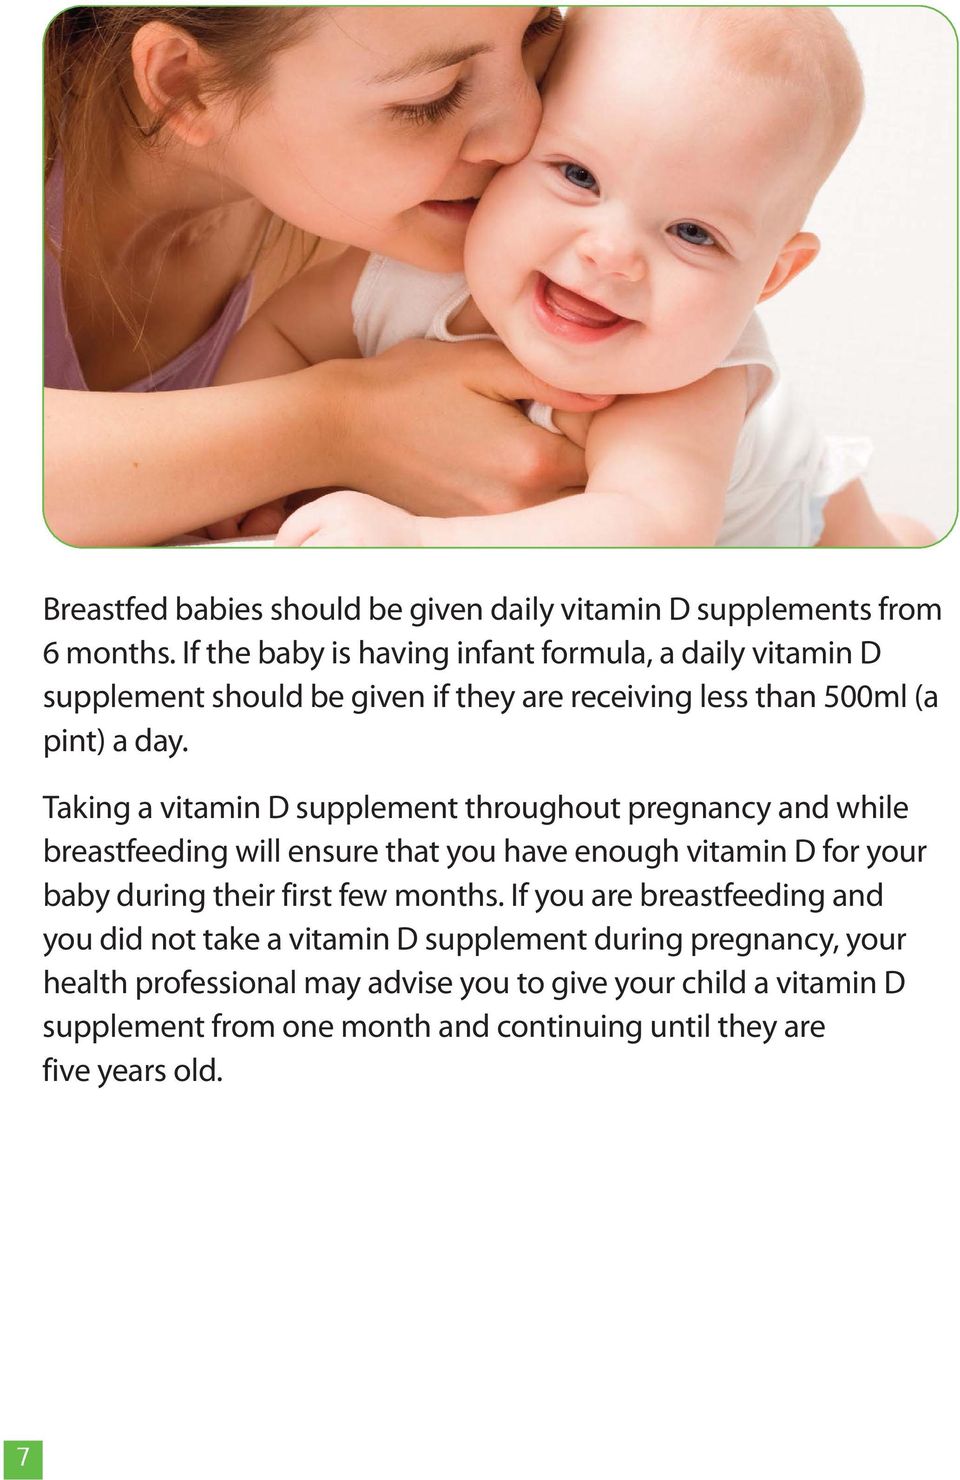 Taking a vitamin D supplement throughout pregnancy and while breastfeeding will ensure that you have enough vitamin D for your baby during their first